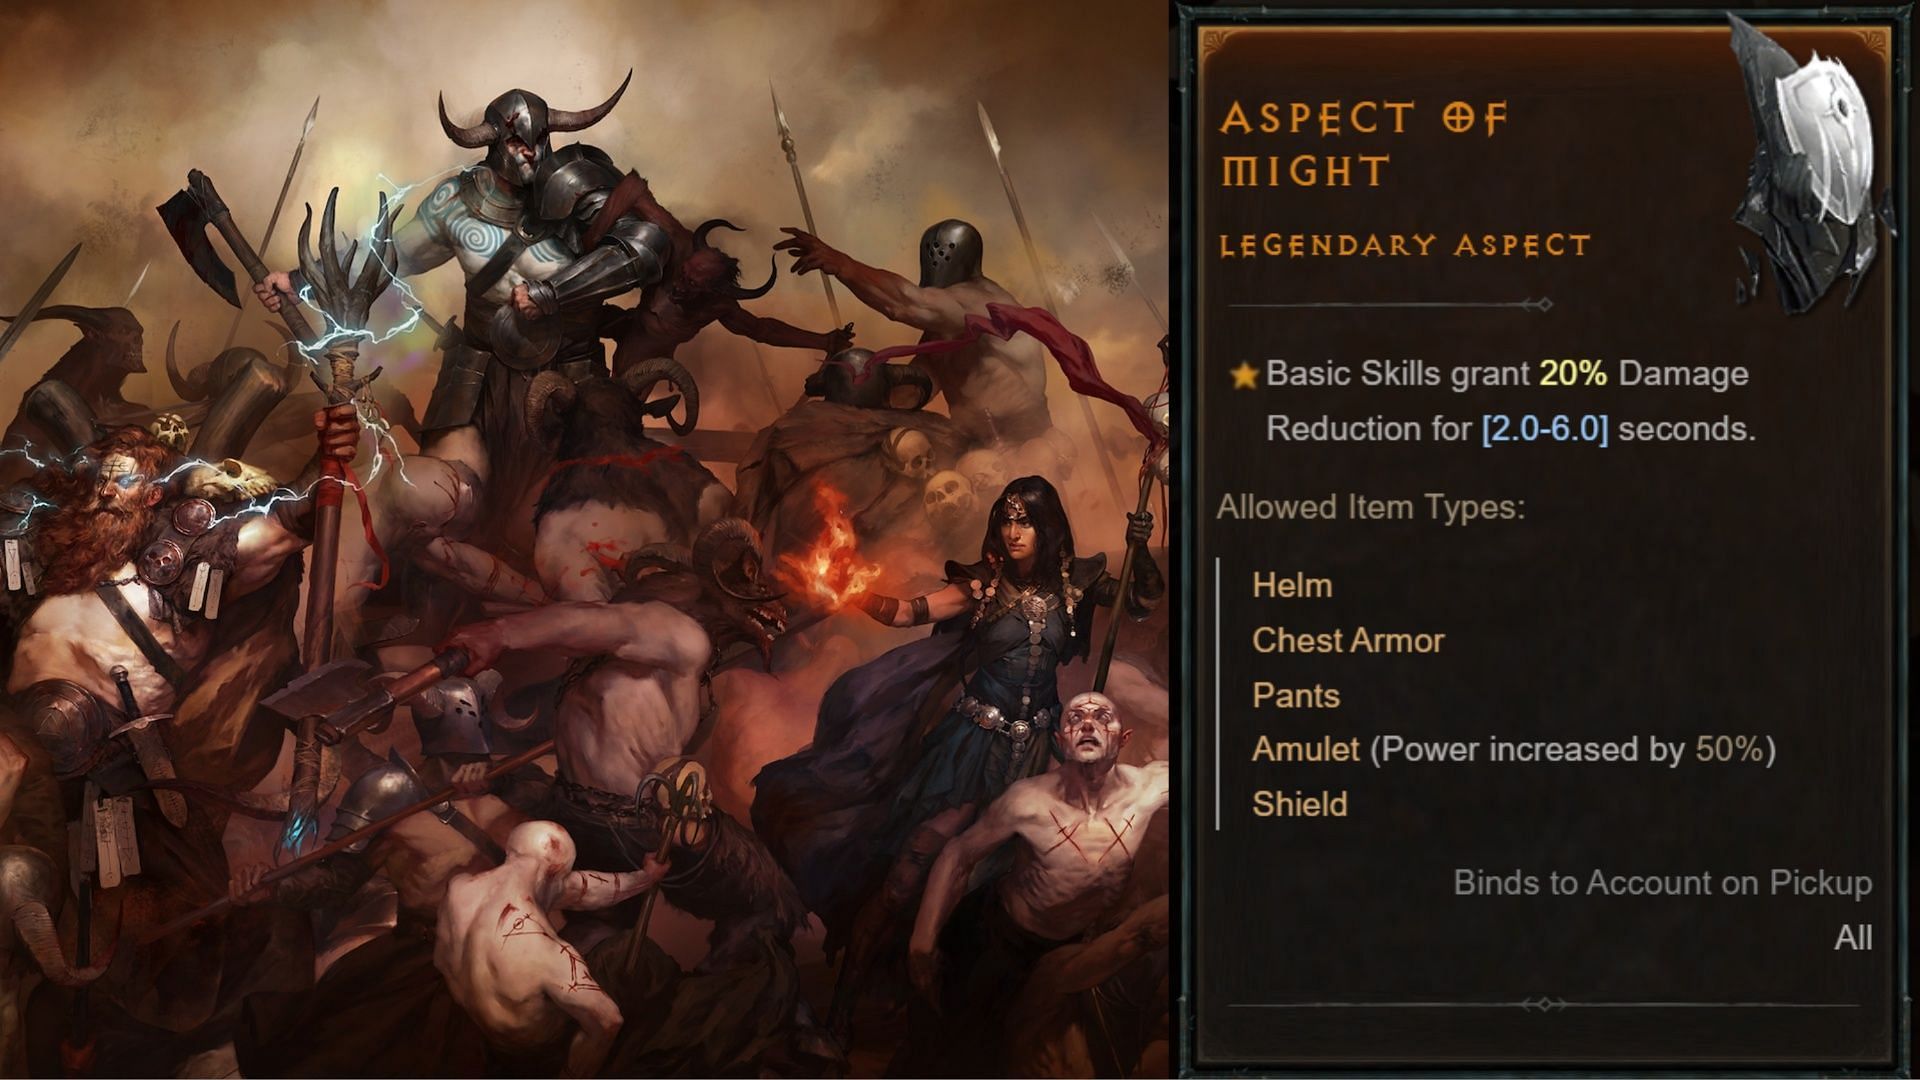 All Diablo 4 classes engaged in battle on the left and Aspect of Might description on the right.